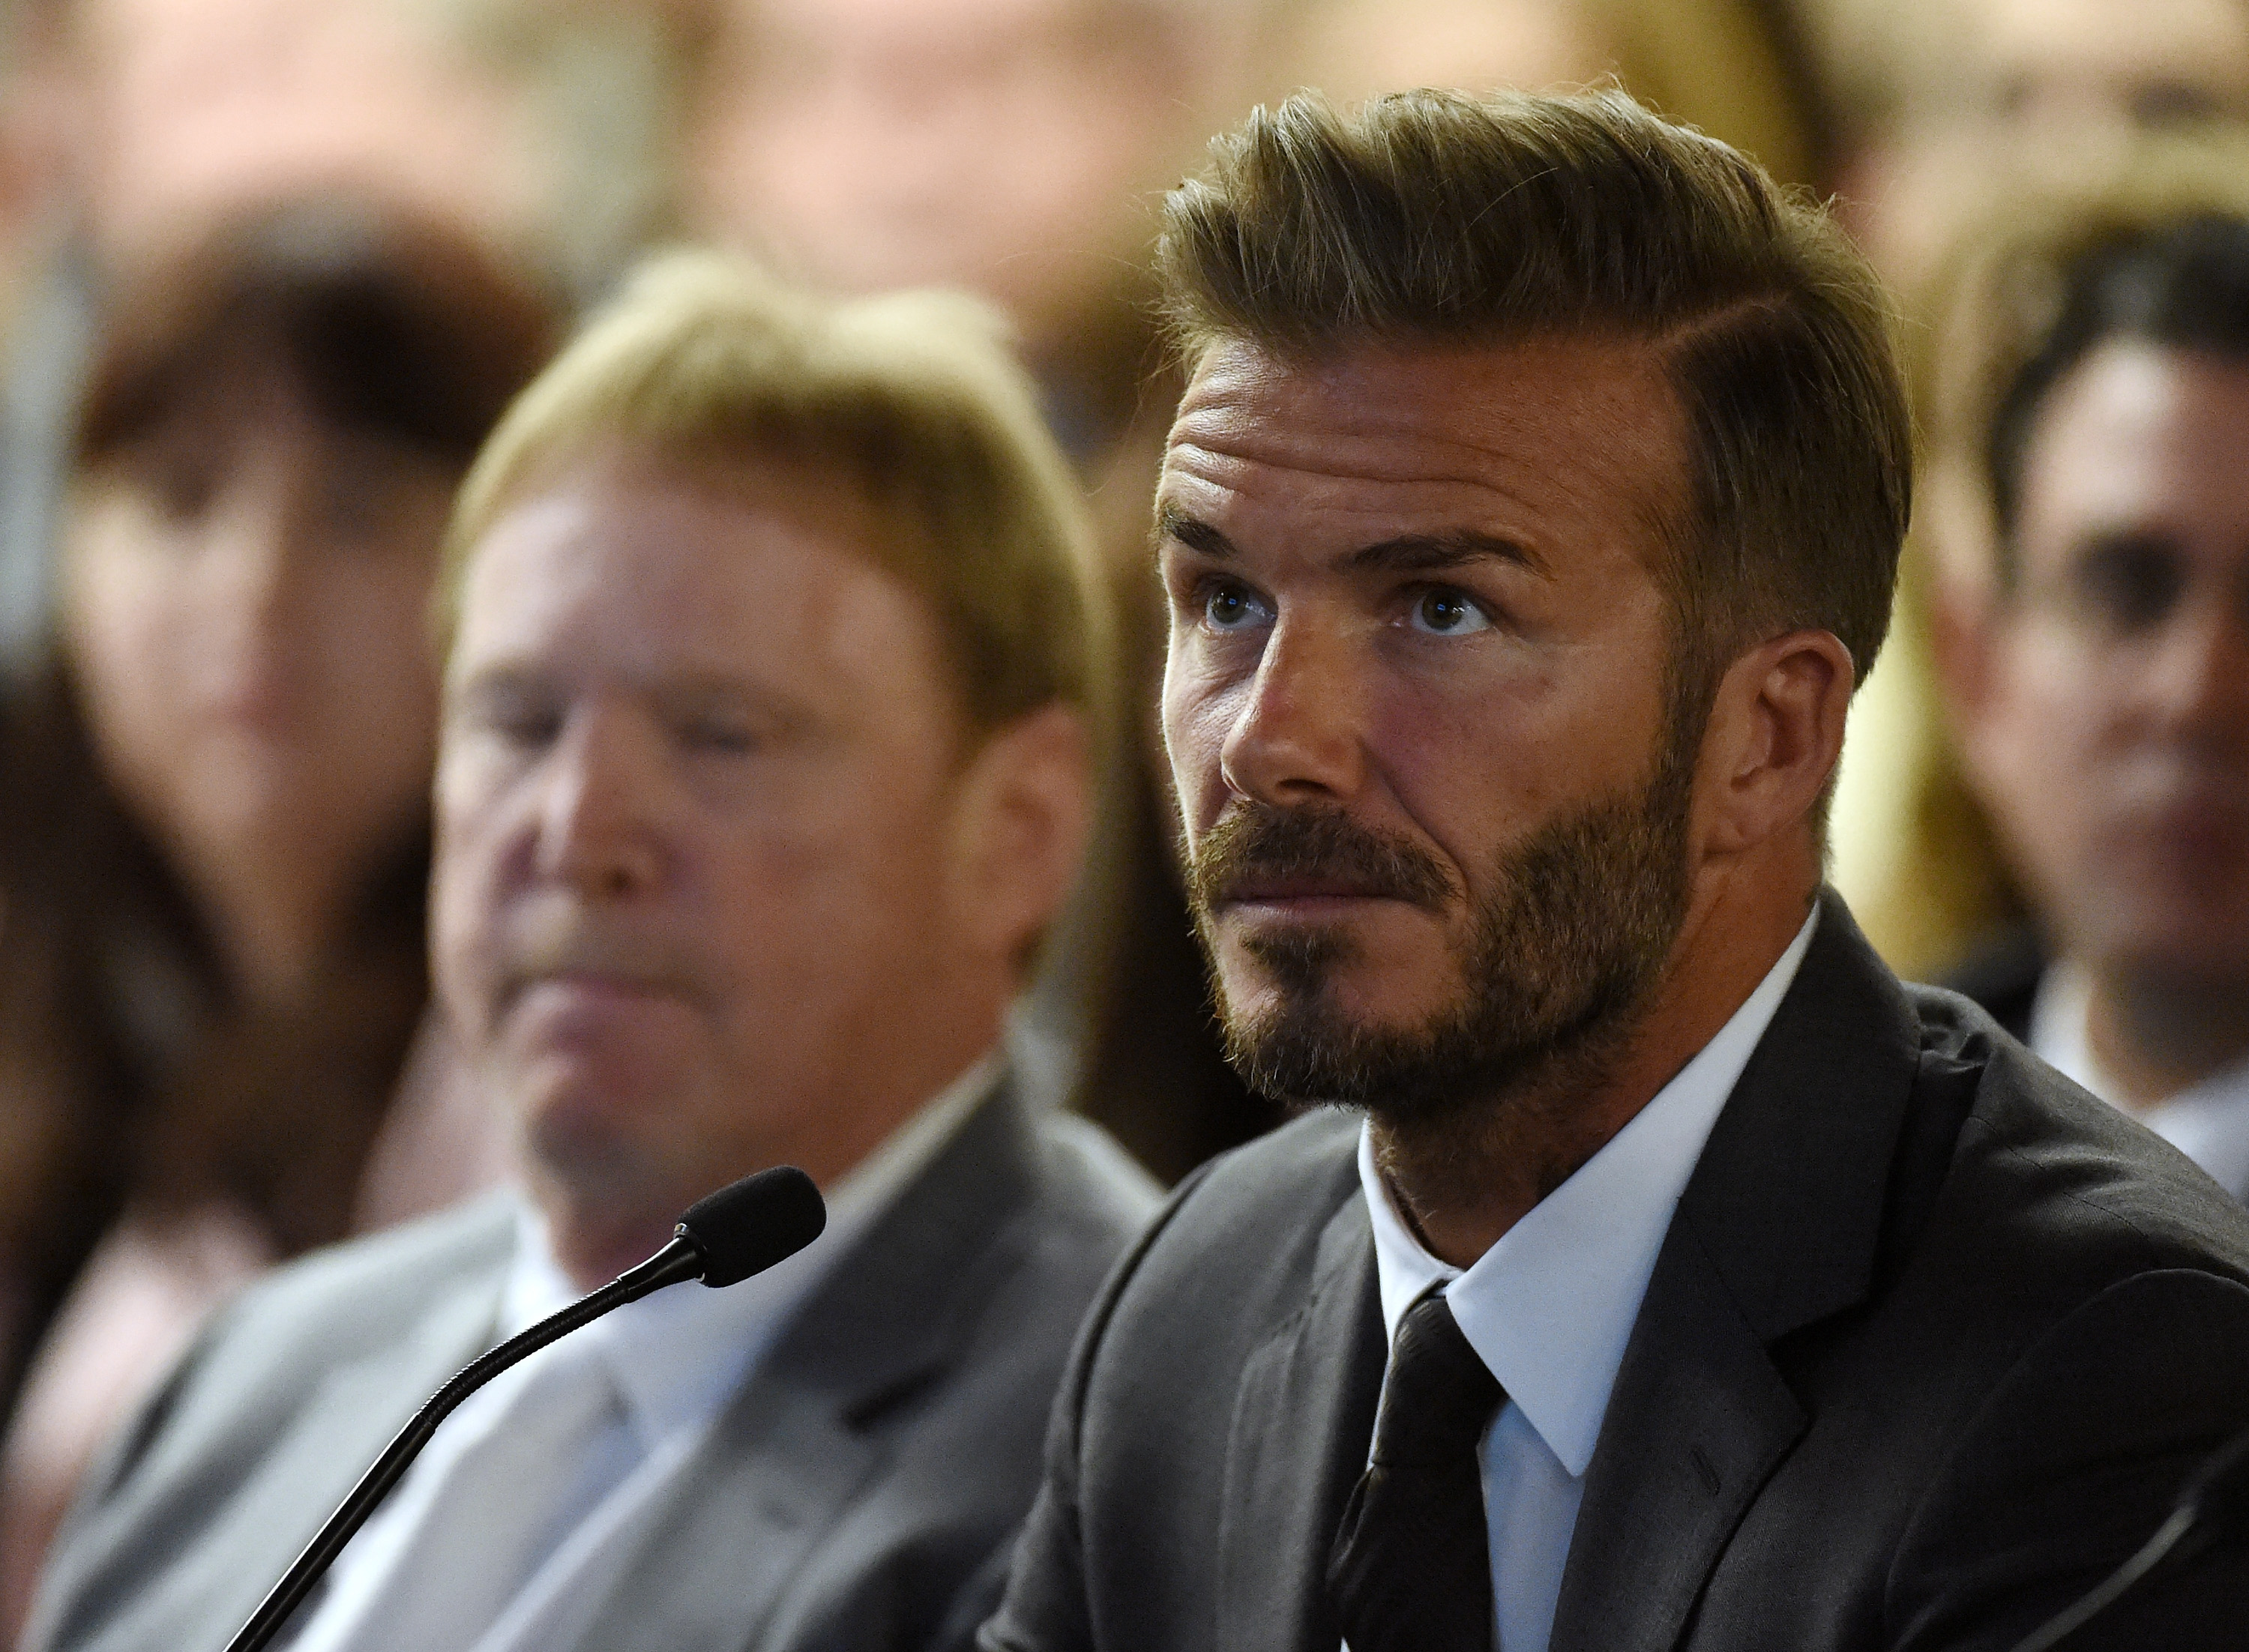 LAS VEGAS, NV - APRIL 28:  Oakland Raiders owner Mark Davis (L) and former soccer player David Beckham attend a Southern Nevada Tourism Infrastructure Committee meeting at UNLV on April 28, 2016 in Las Vegas, Nevada. Davis told the committee he is willing to spend USD 500 million as part of a deal to move the team to Las Vegas if a proposed USD 1.3 billion, 65,000-seat domed stadium is built by casino magnate Sheldon Adelson's Las Vegas Sands Corp. and real estate agency Majestic Realty, possibly on a vacant 42-acre lot a few blocks east of the Las Vegas Strip recently purchased by UNLV.  (Photo by Ethan Miller/Getty Images)